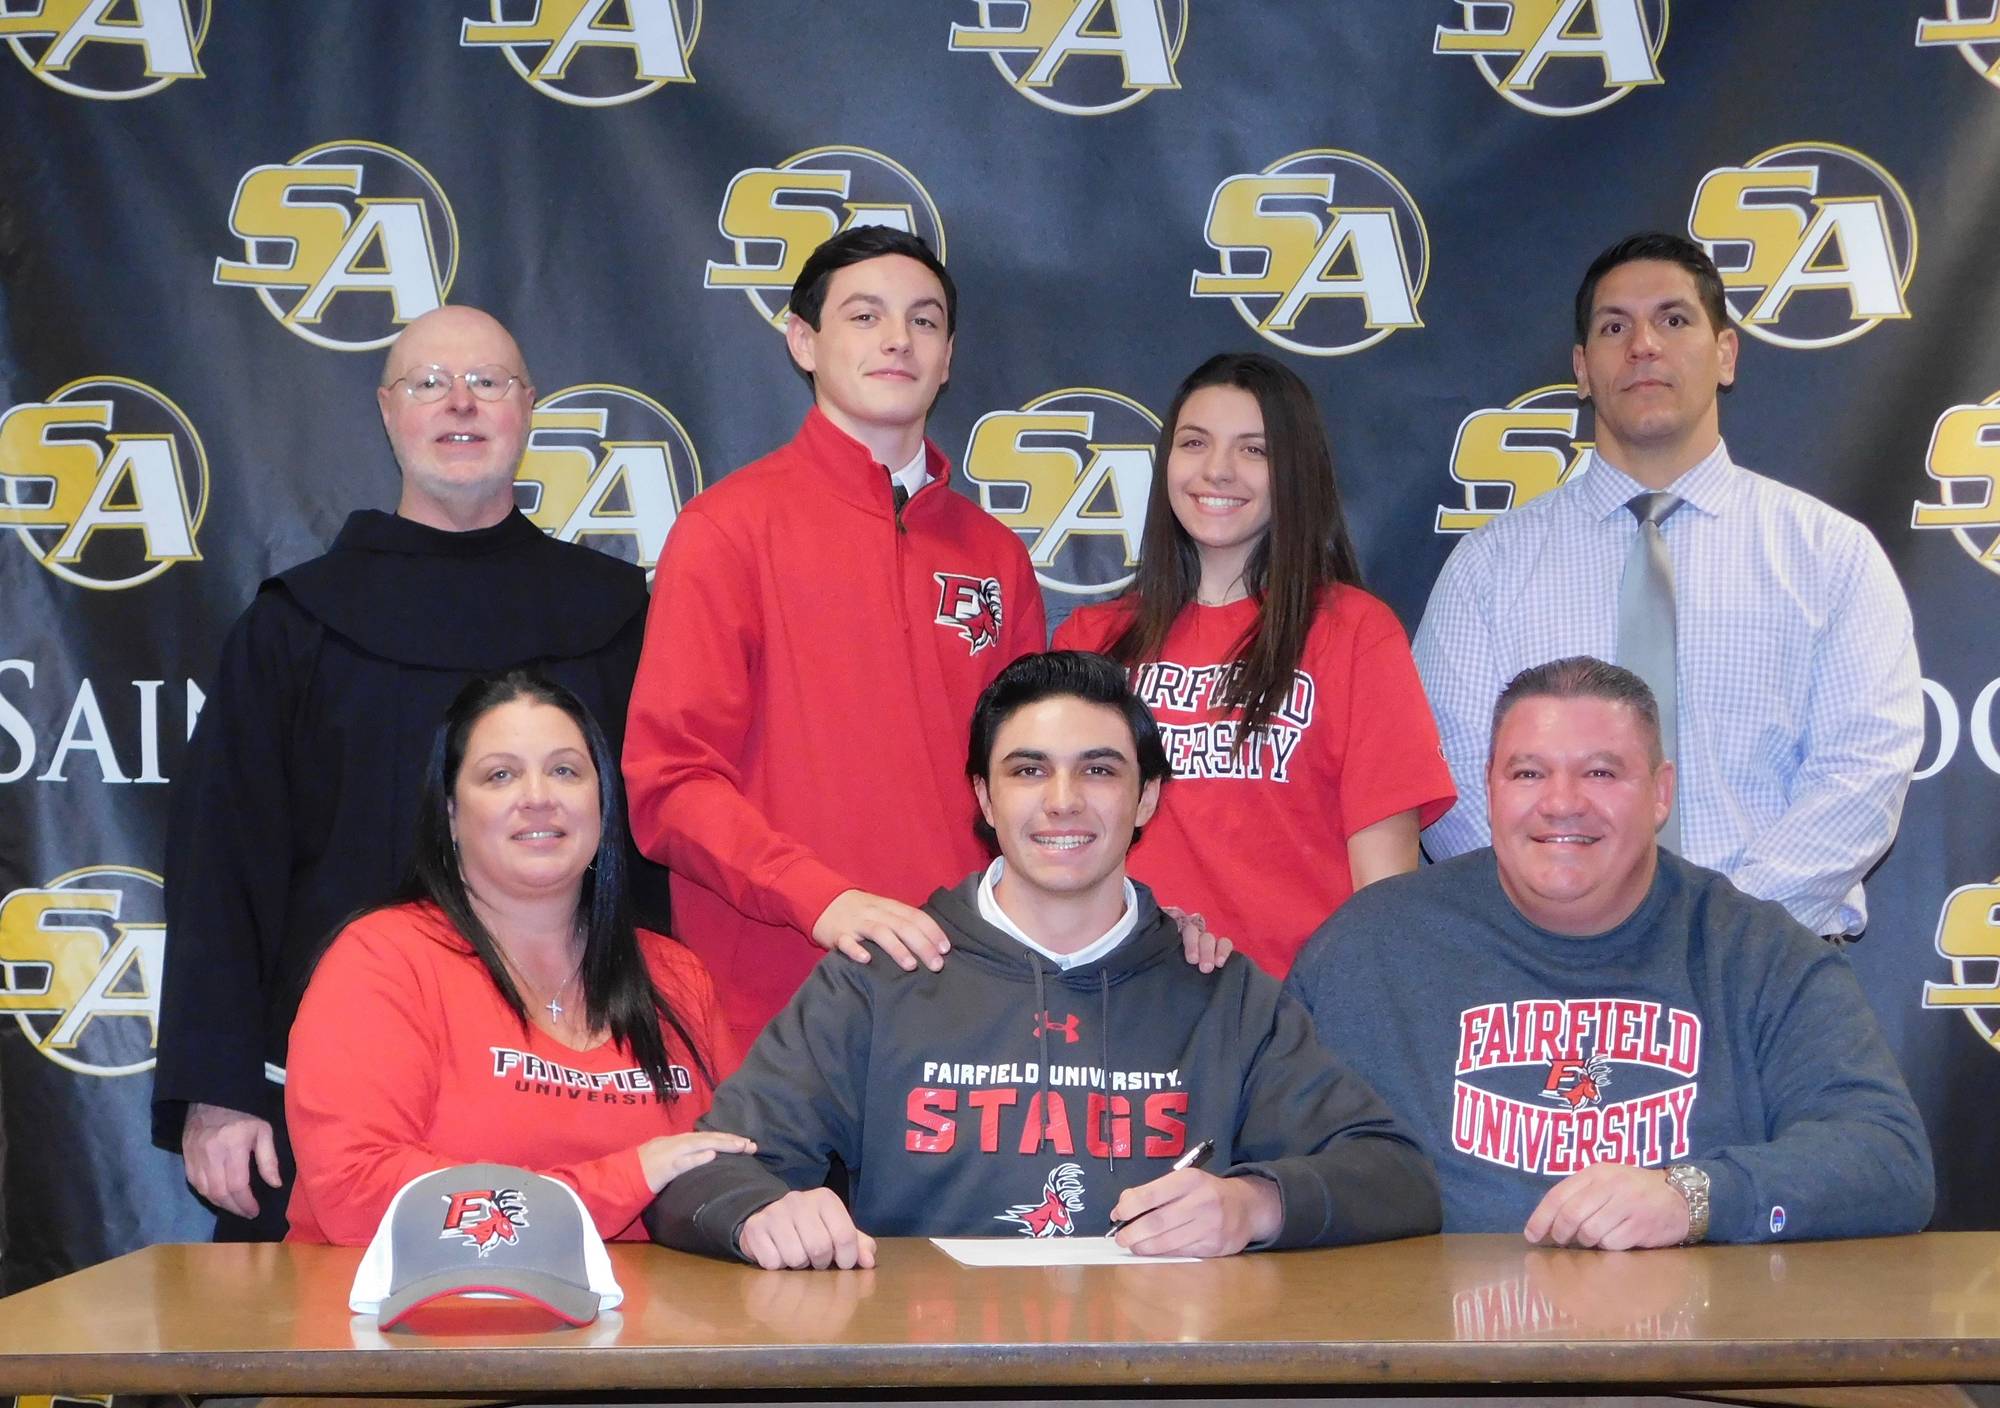 Congratulations William Fitzgerald to committing to play Baseball at Fairfield University